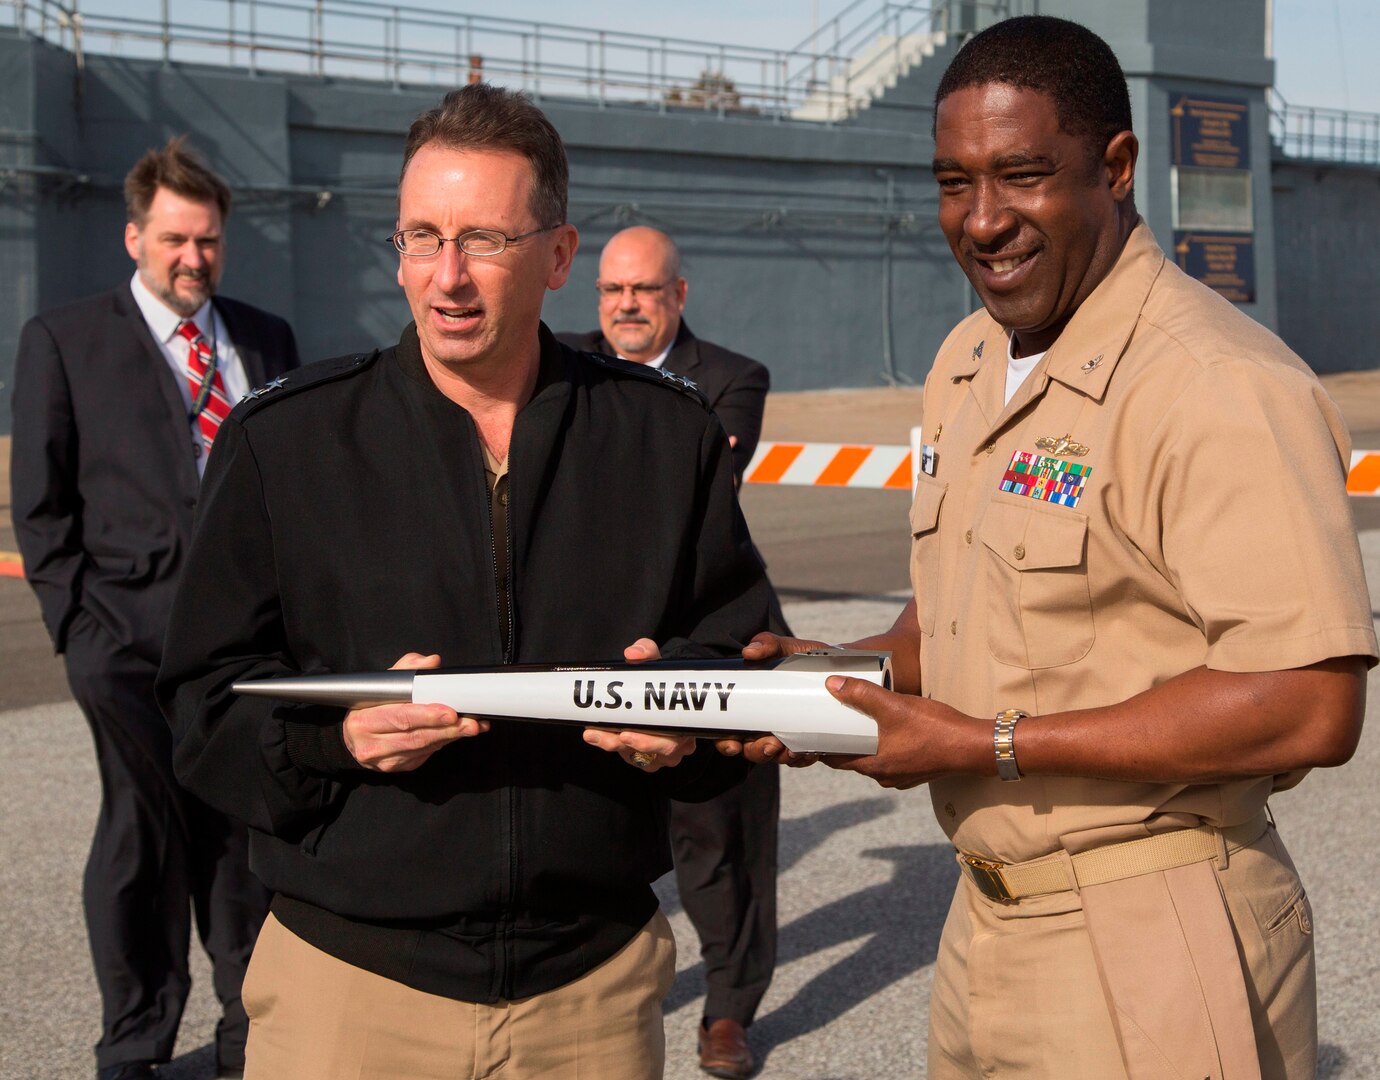 DAHLGREN, Va. - Rear Admiral David Hahn, chief of naval research, and Capt. Godfrey "Gus" Weekes, NSWCDD commanding officer, hold an electromagnetic railgun projectile during Hahn's visit to NSWCDD, Jan. 12. The admiral led his Office of Naval Research (ONR) delegation to see new and emerging ONR sponsored technologies developed at NSWCDD, including directed energy and the electromagnetic railgun. They also watched engineers fire a hypervelocity projectile from a 5-inch, 62-caliber open mount gun at the Potomac River Test Range. (U.S. Navy photo by Ryan DeShazo/Released)